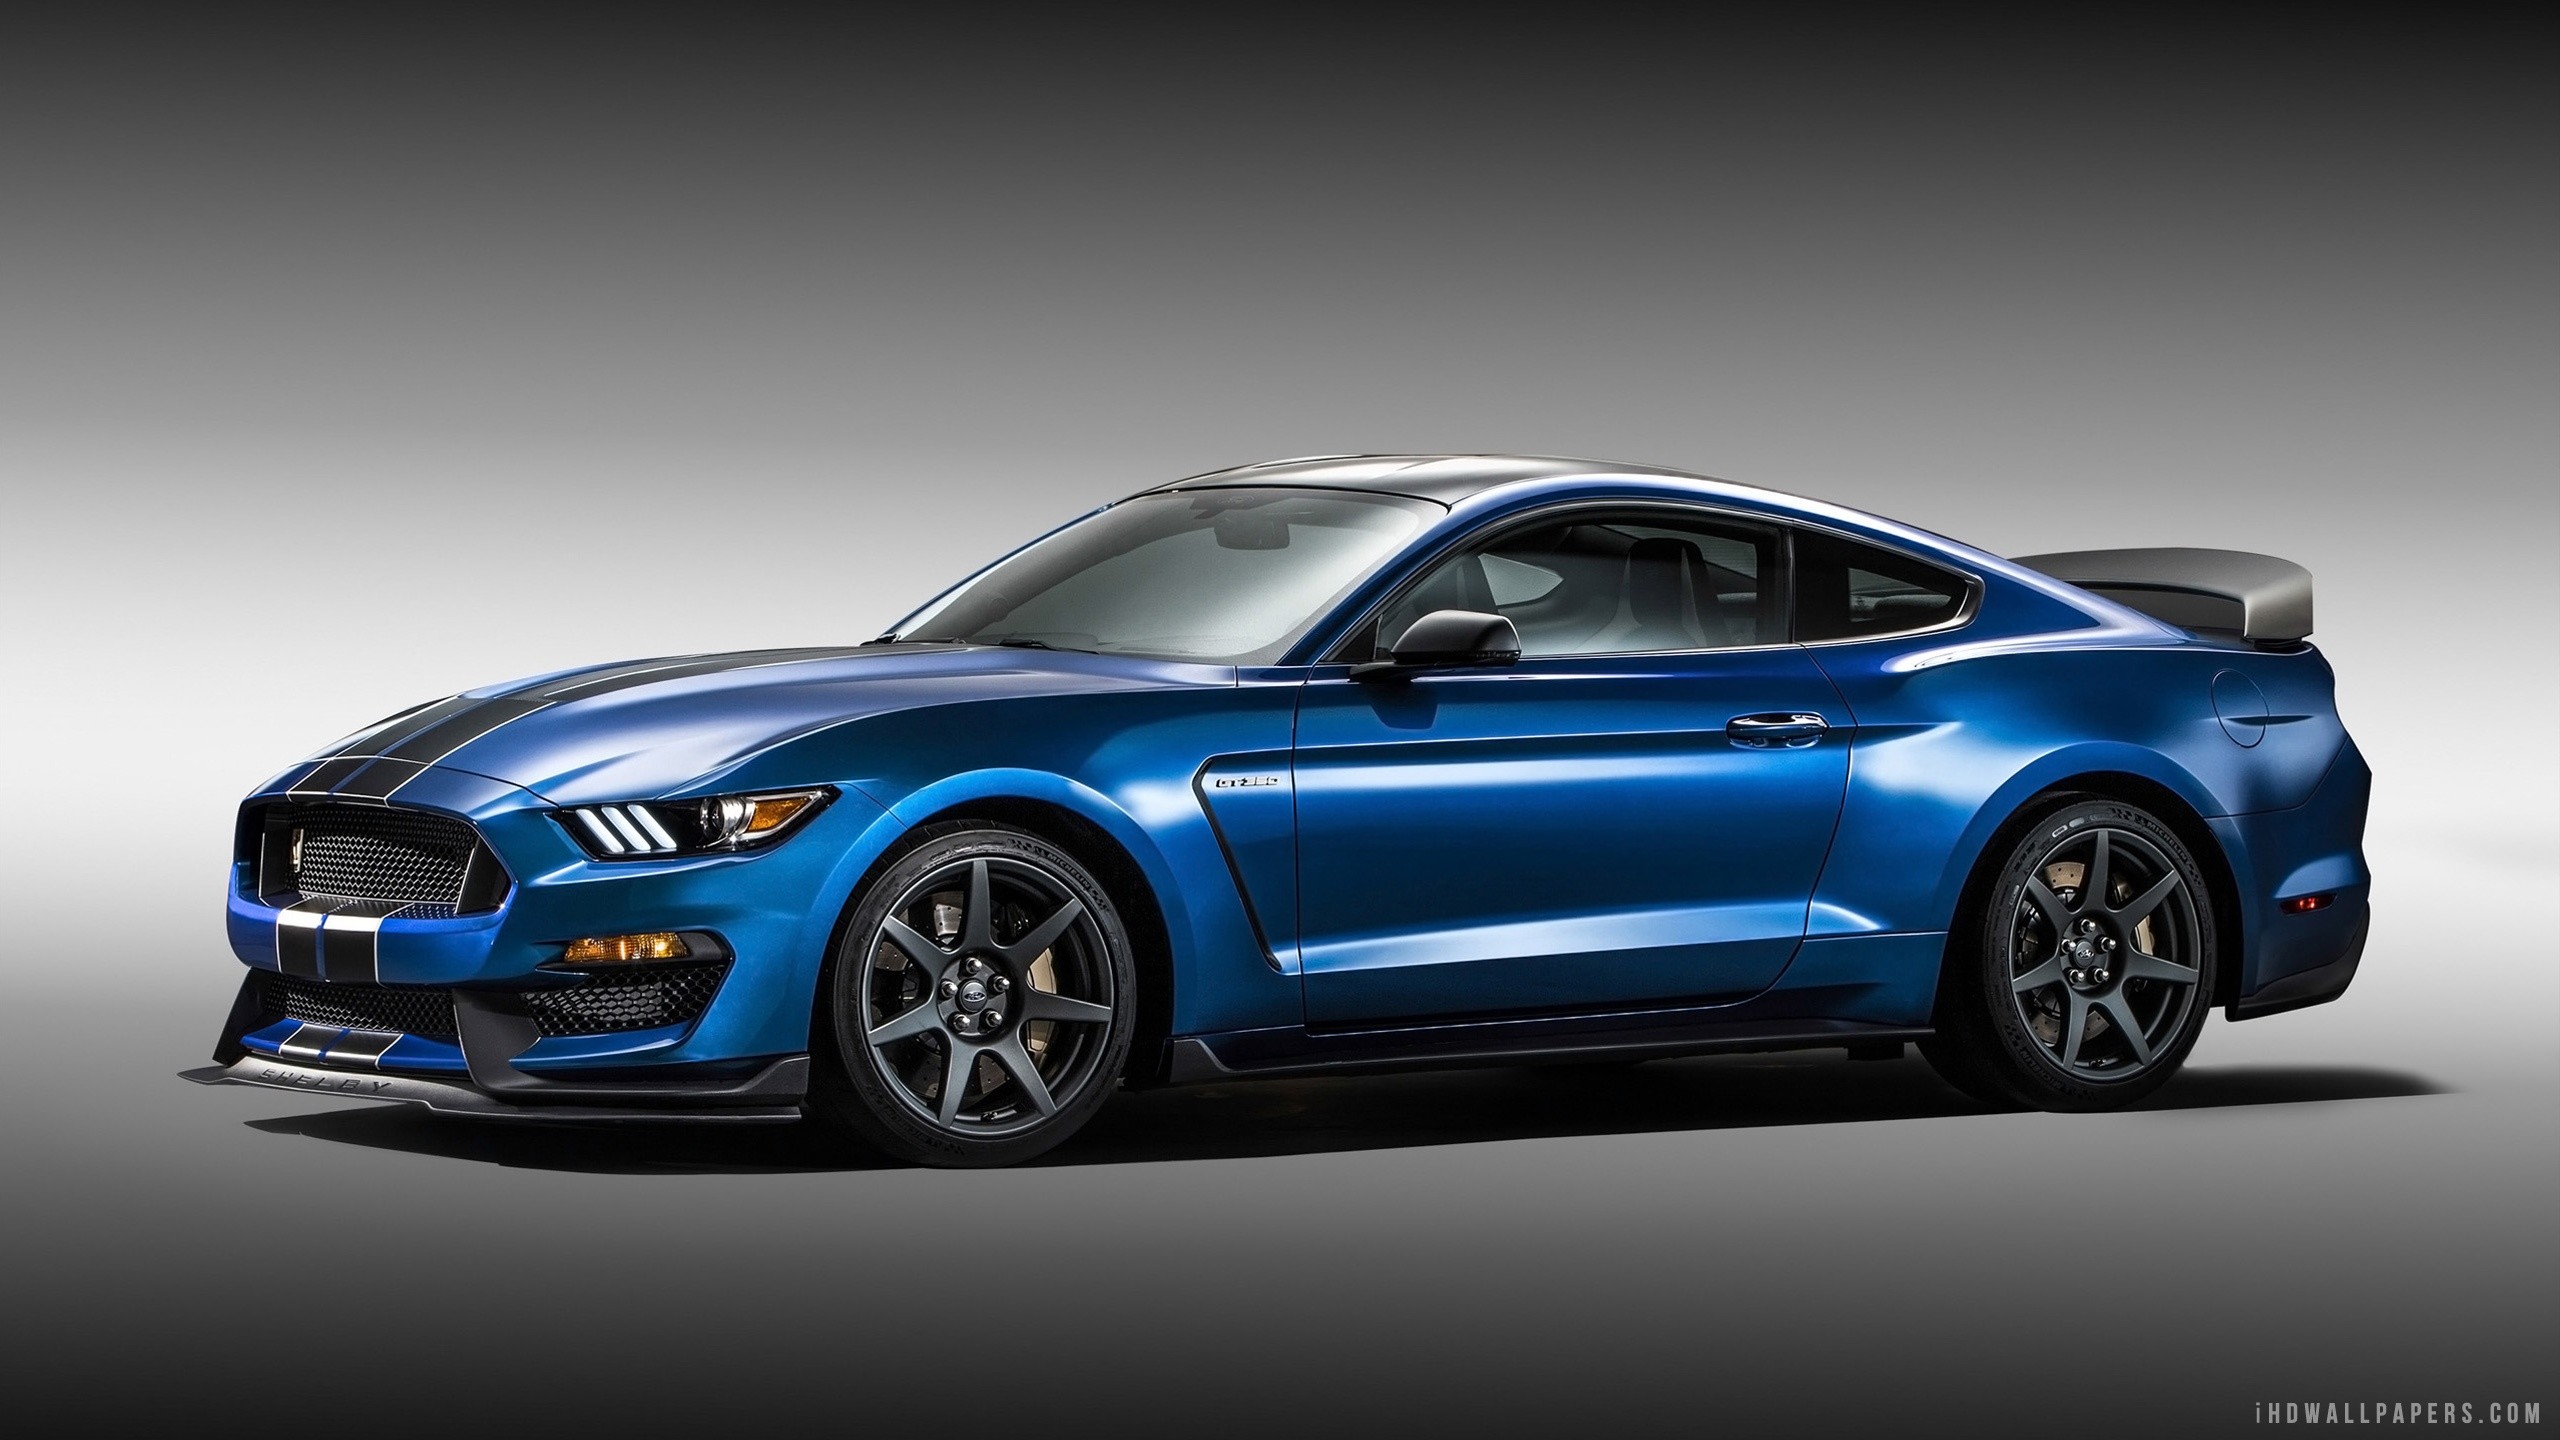 2560x1440 2016 Ford Mustang Shelby GT350 HD Wallpaper iHD Wallpapers 